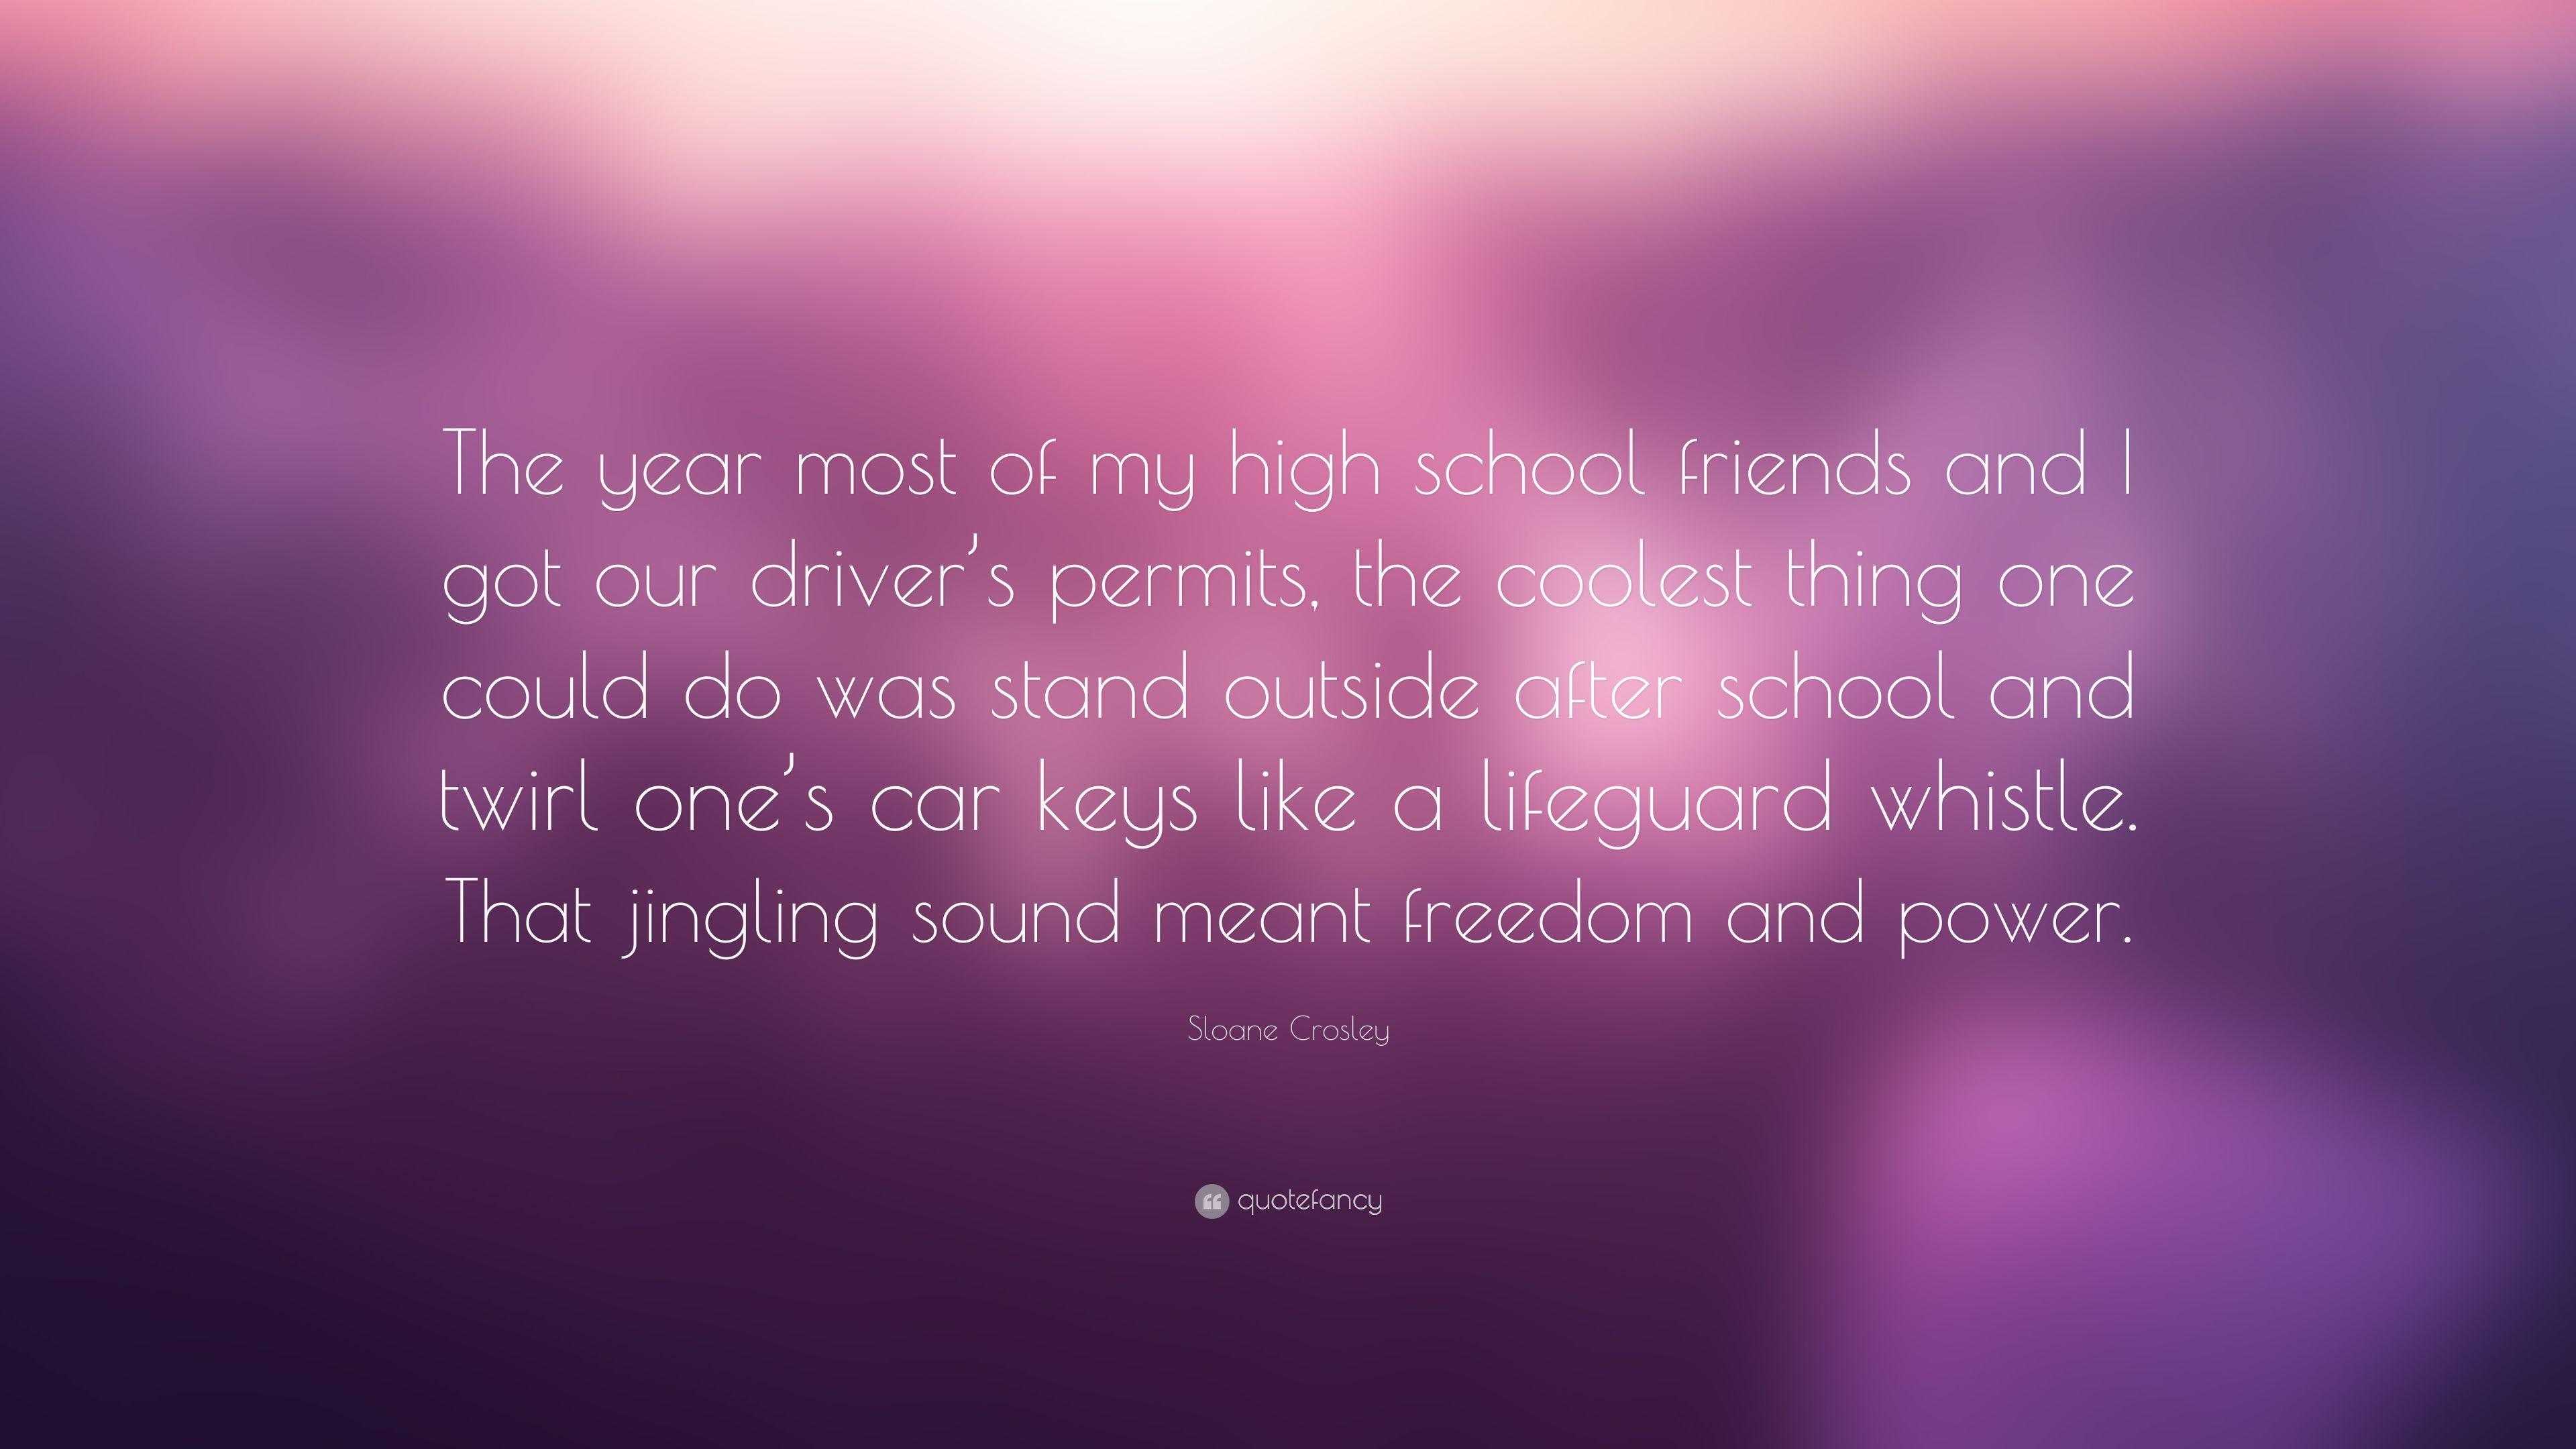 Sloane Crosley Quote: “The year most of my high school friends and I